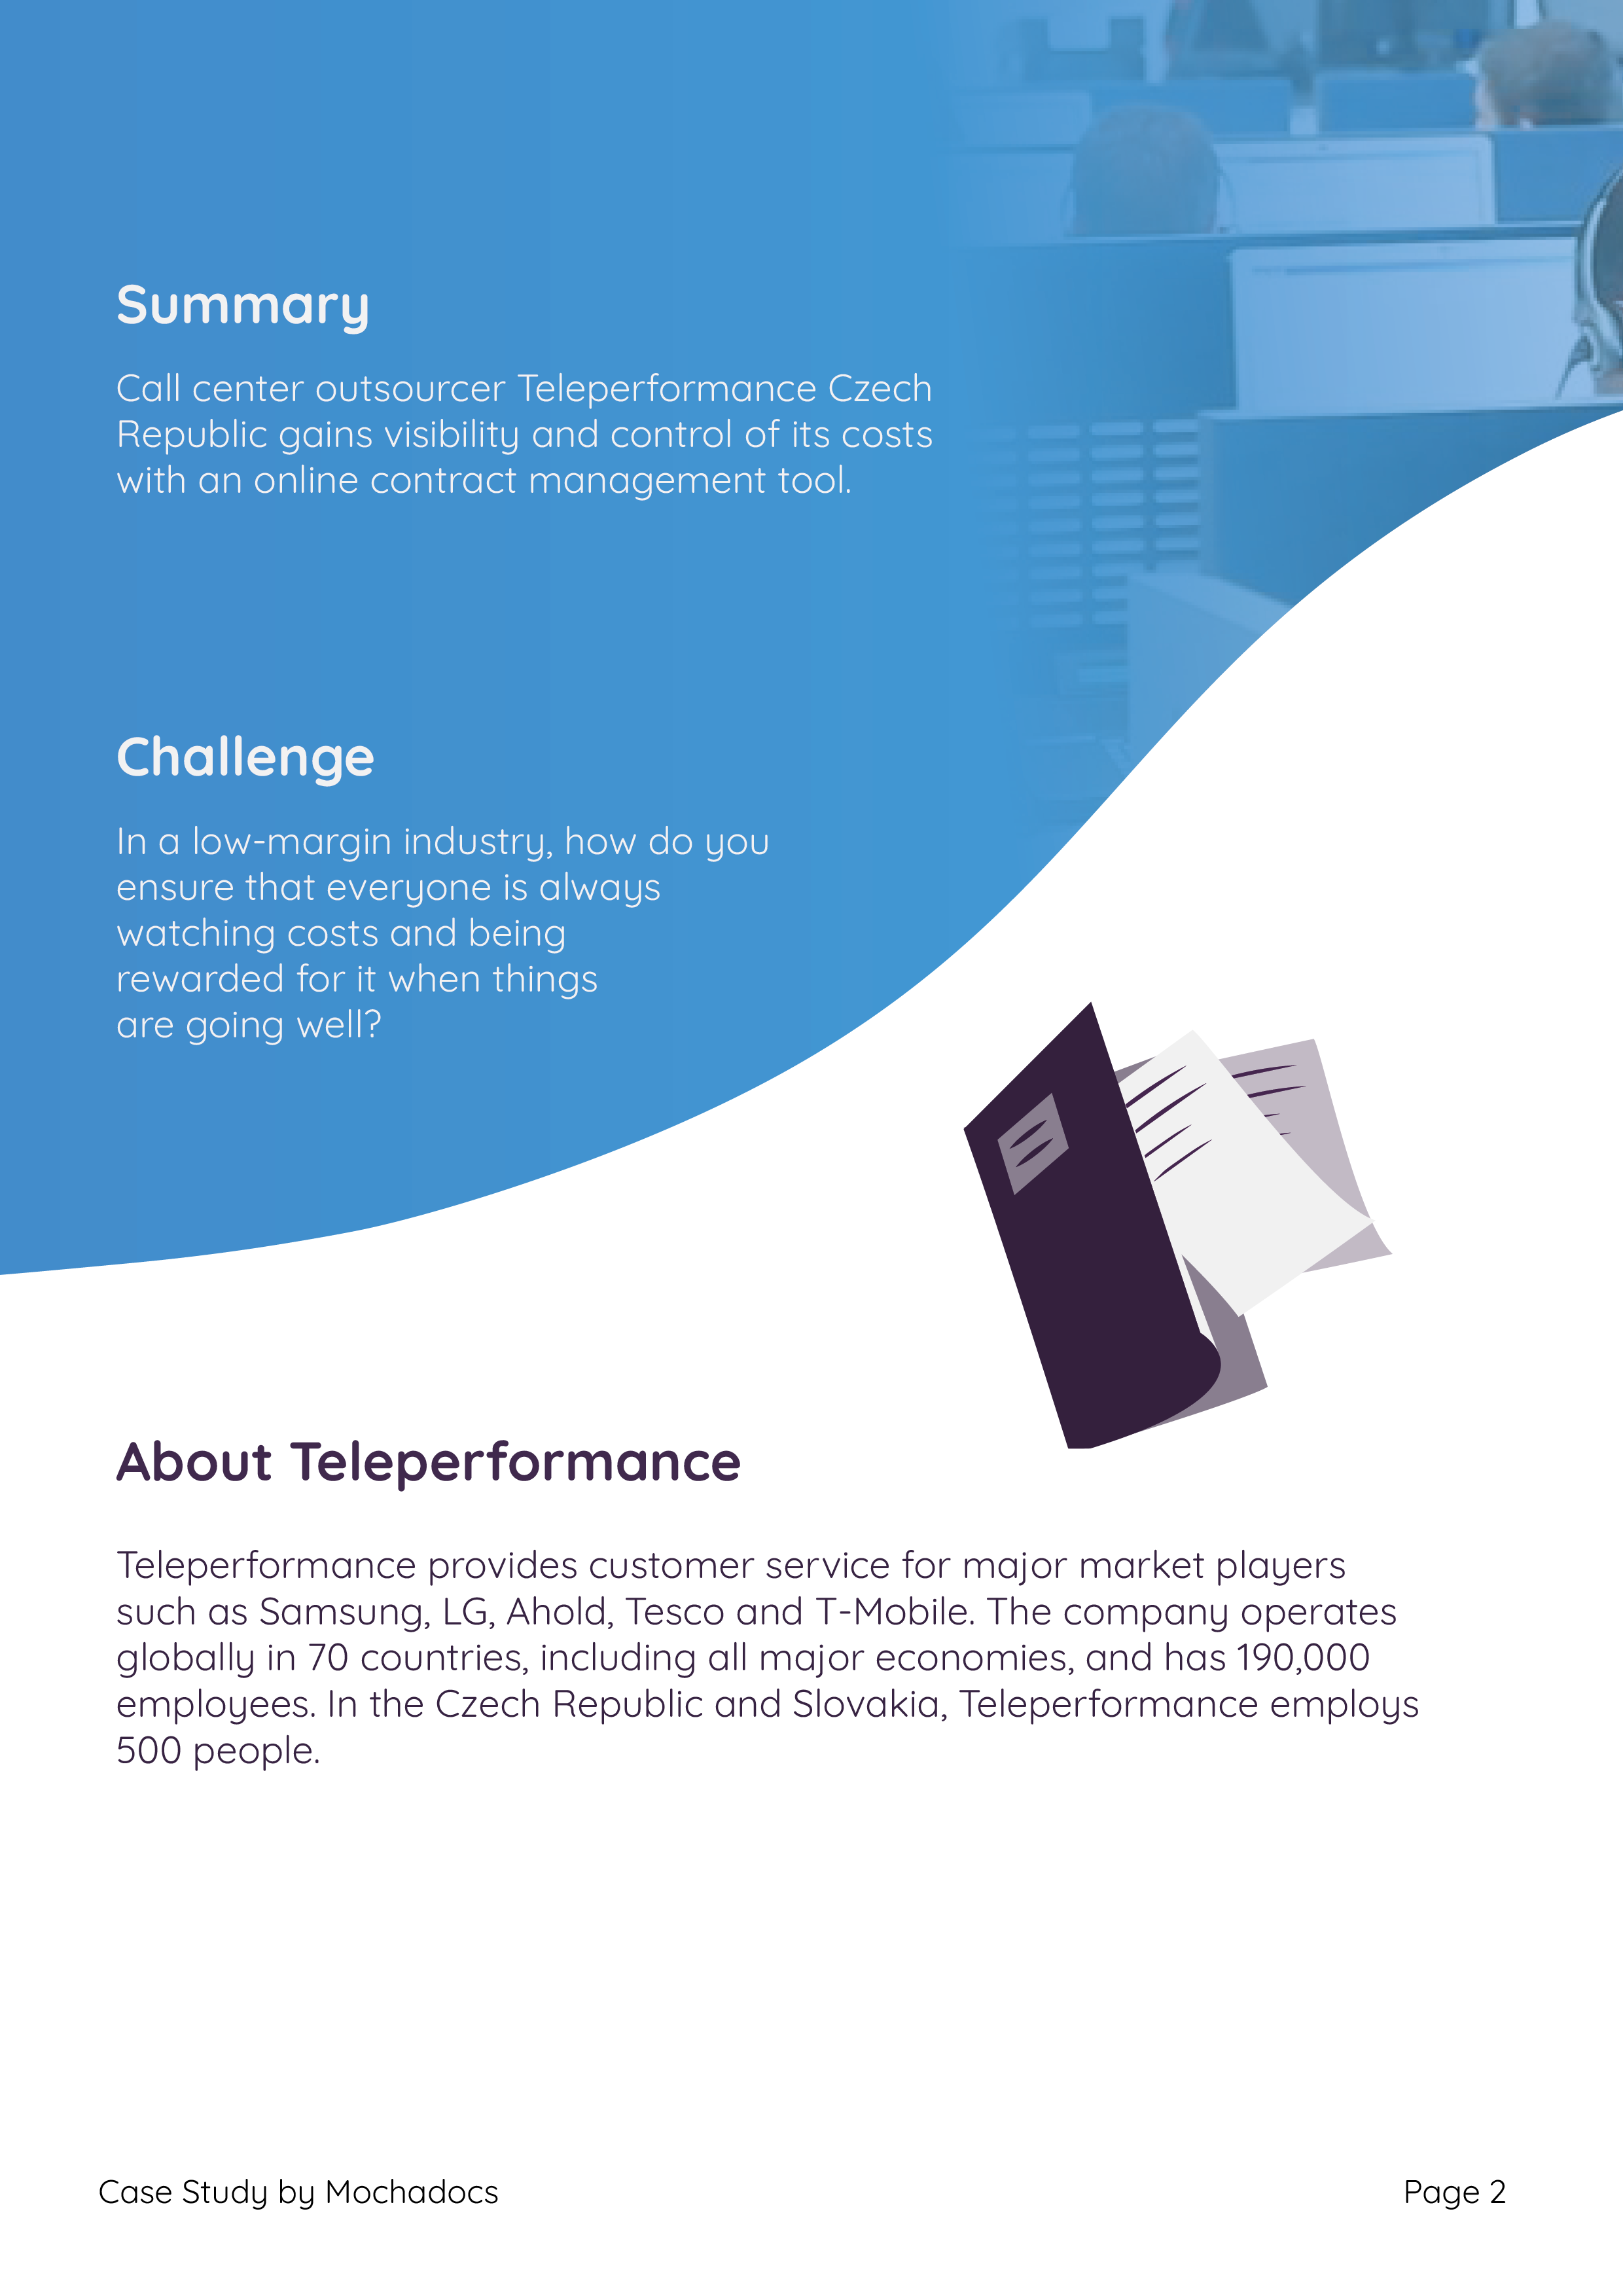 Mochadocs - Contract Management - Case Study - Teleperformance - Page 2